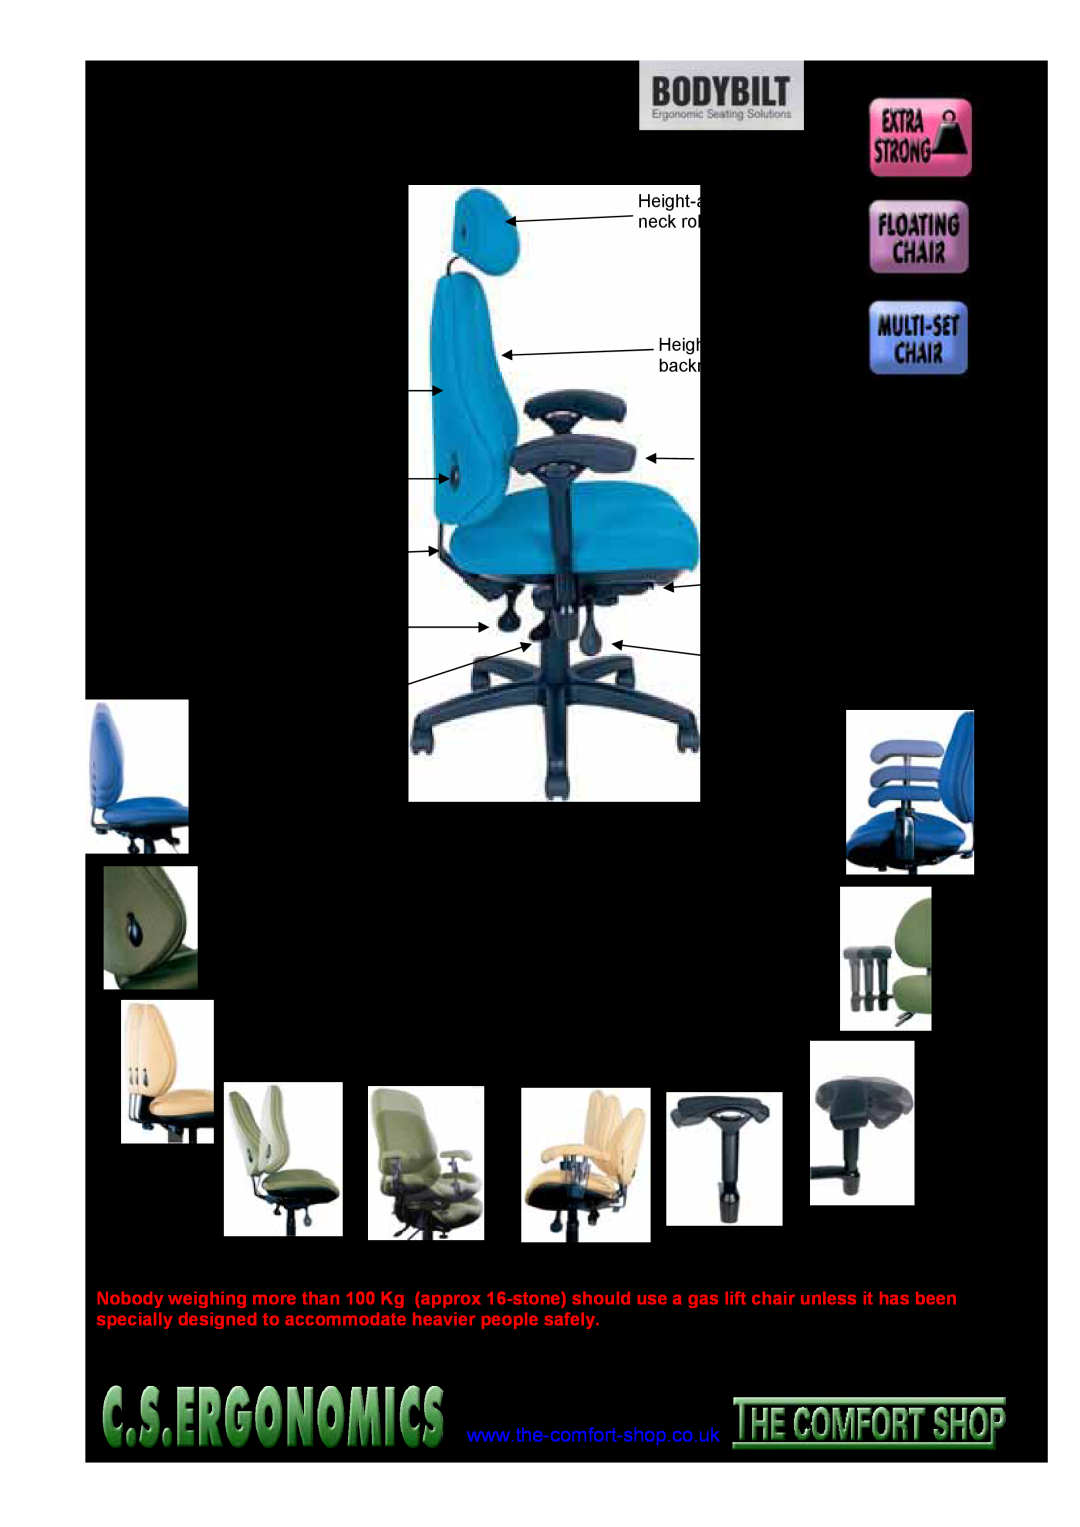 Fellowes RH 400, RH 300 Heavy-dutychairs, Tough chairs from Texas, BodyBilt chairs, Designed to meet unusual needs, 01253 